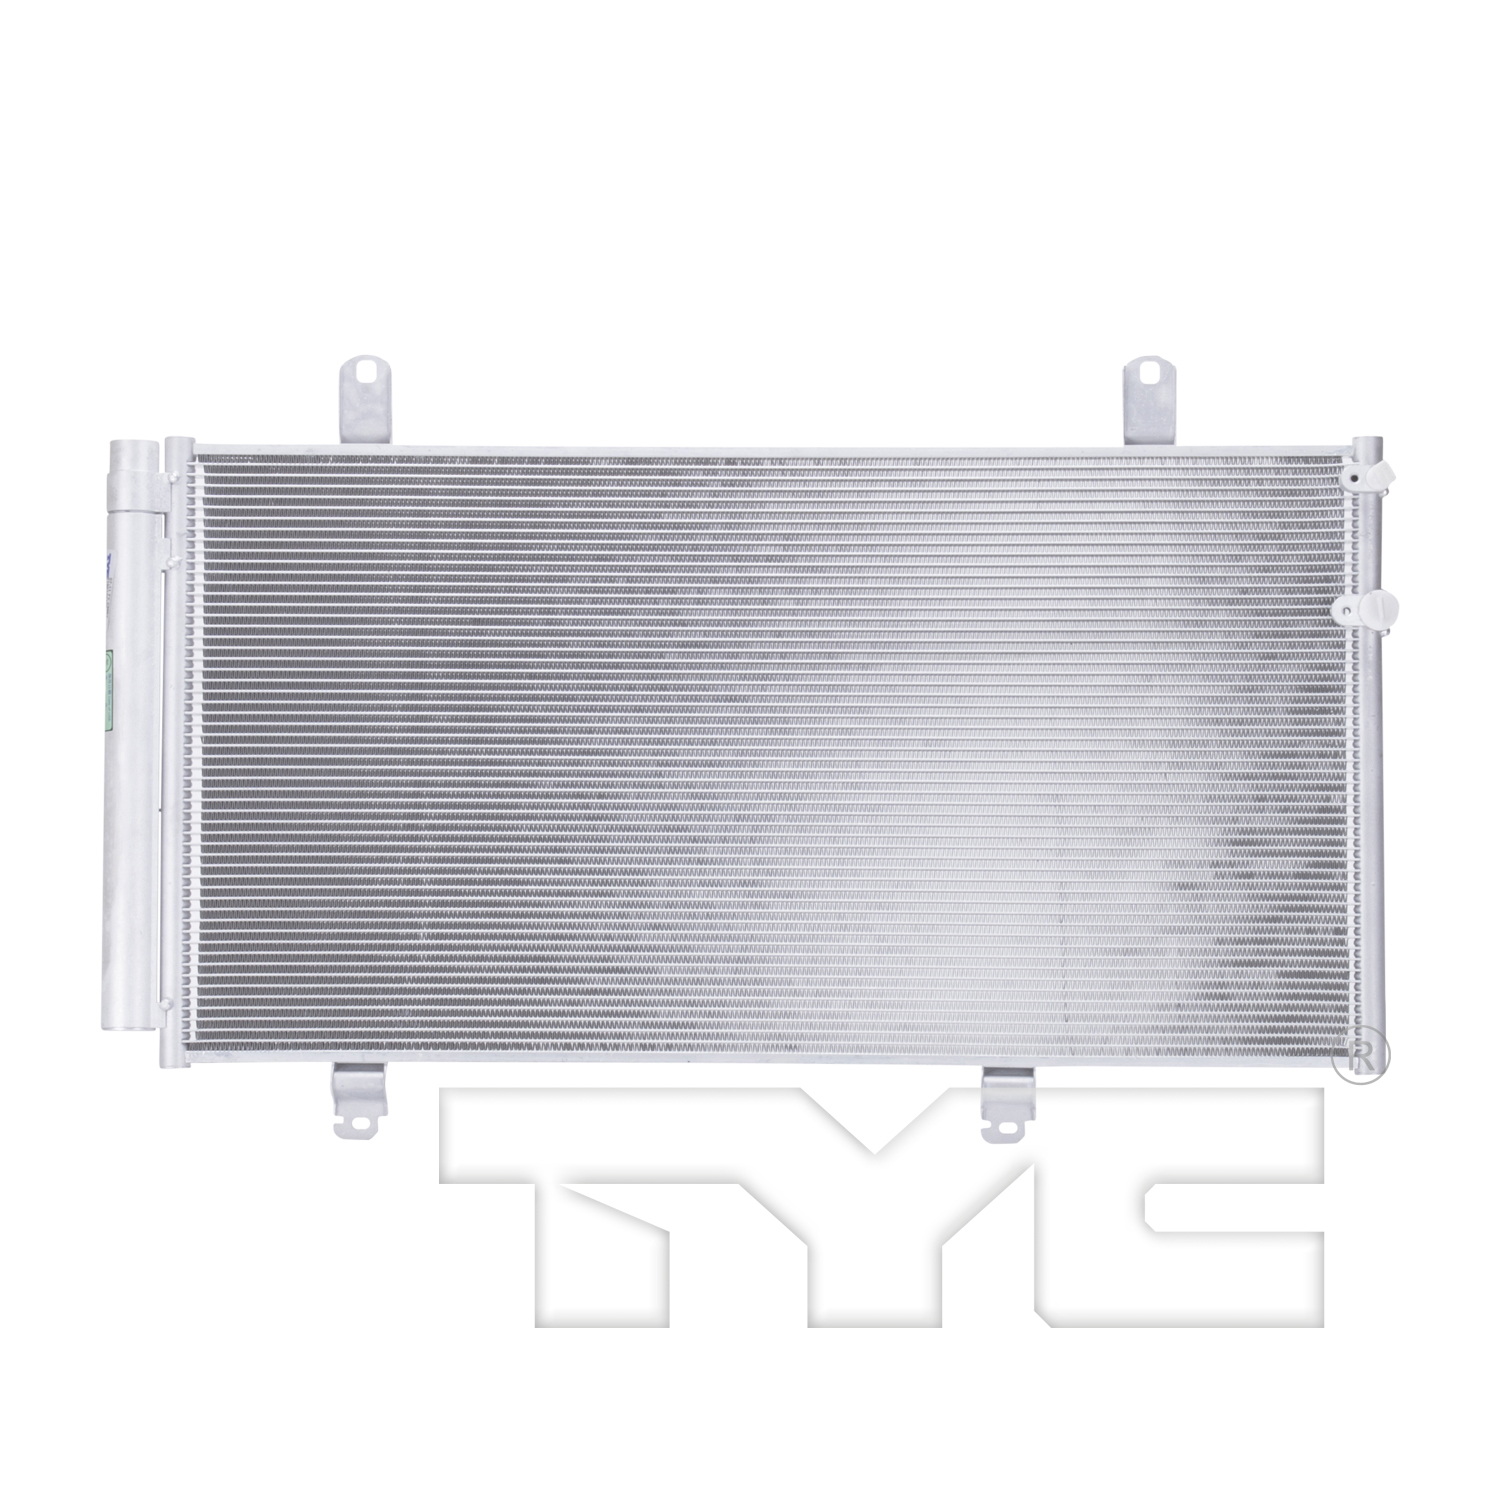 Aftermarket AC CONDENSERS for TOYOTA - AVALON, AVALON,05-06,Air conditioning condenser